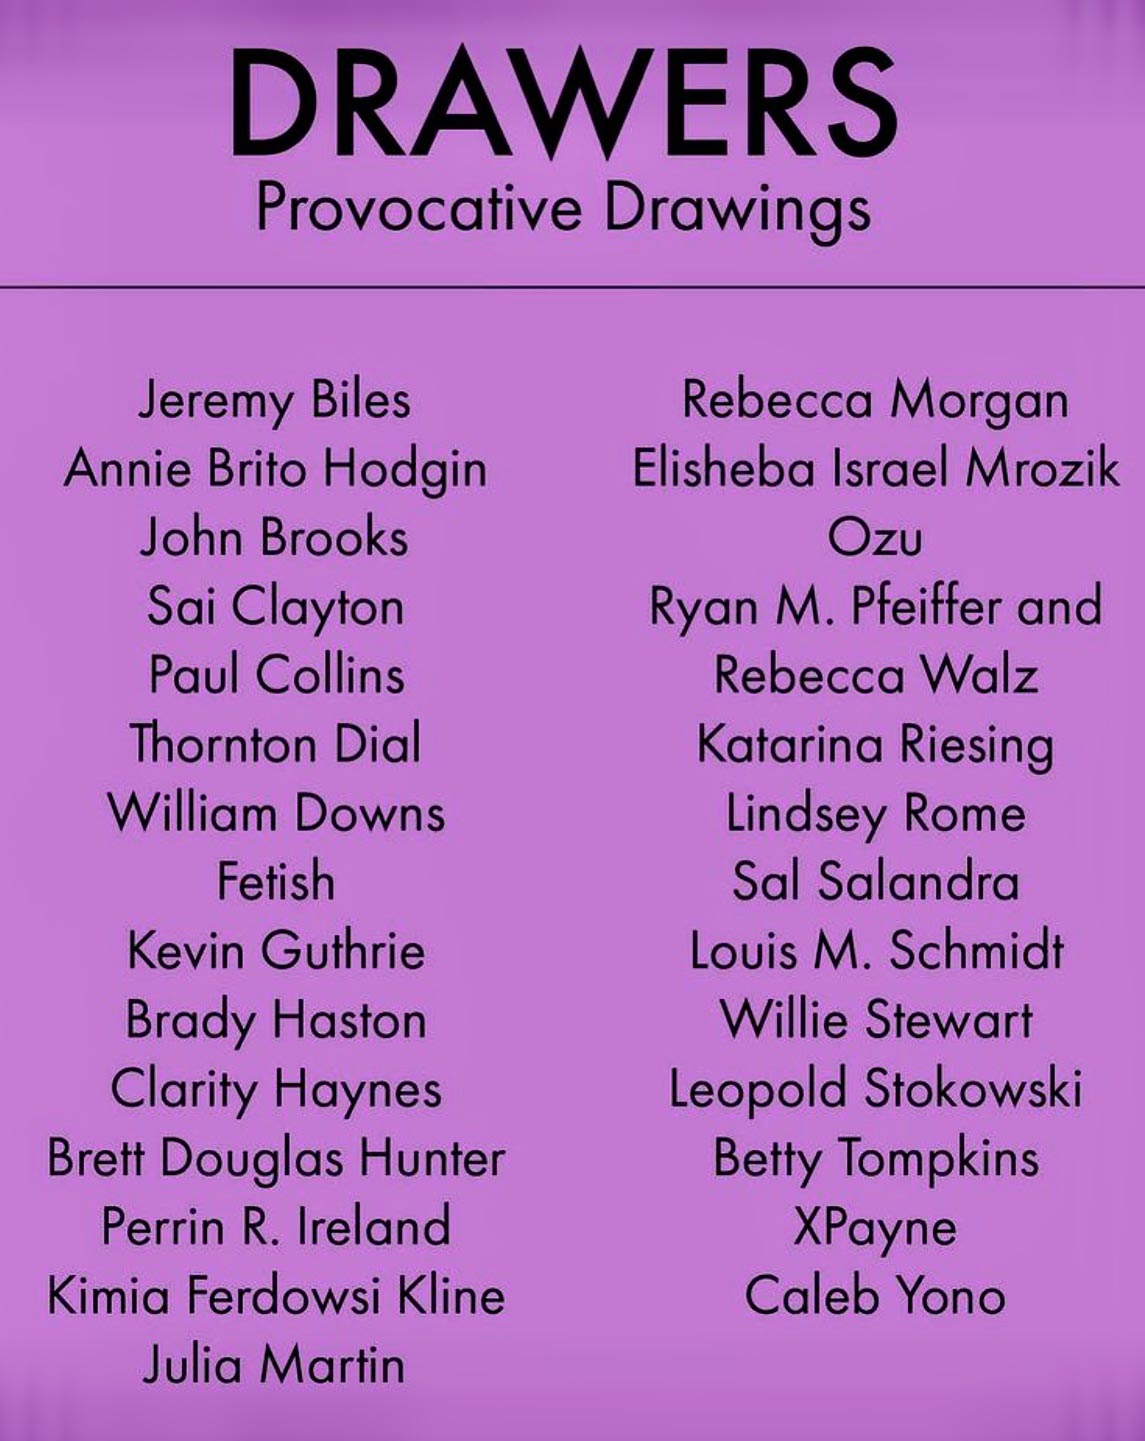 List of Drawers Artists